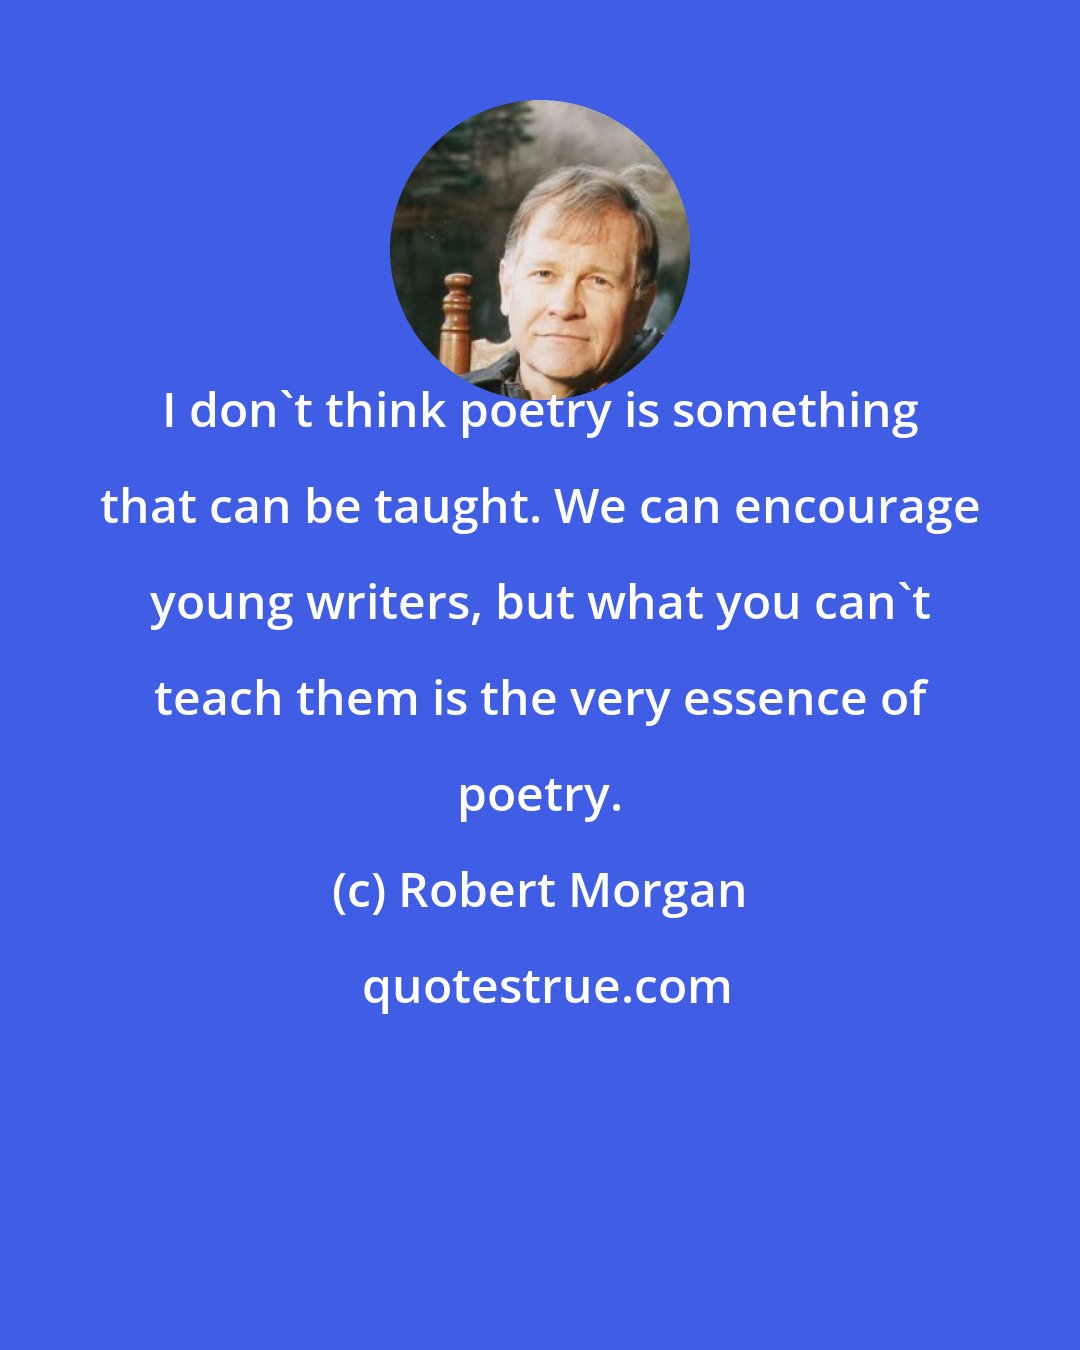 Robert Morgan: I don't think poetry is something that can be taught. We can encourage young writers, but what you can't teach them is the very essence of poetry.